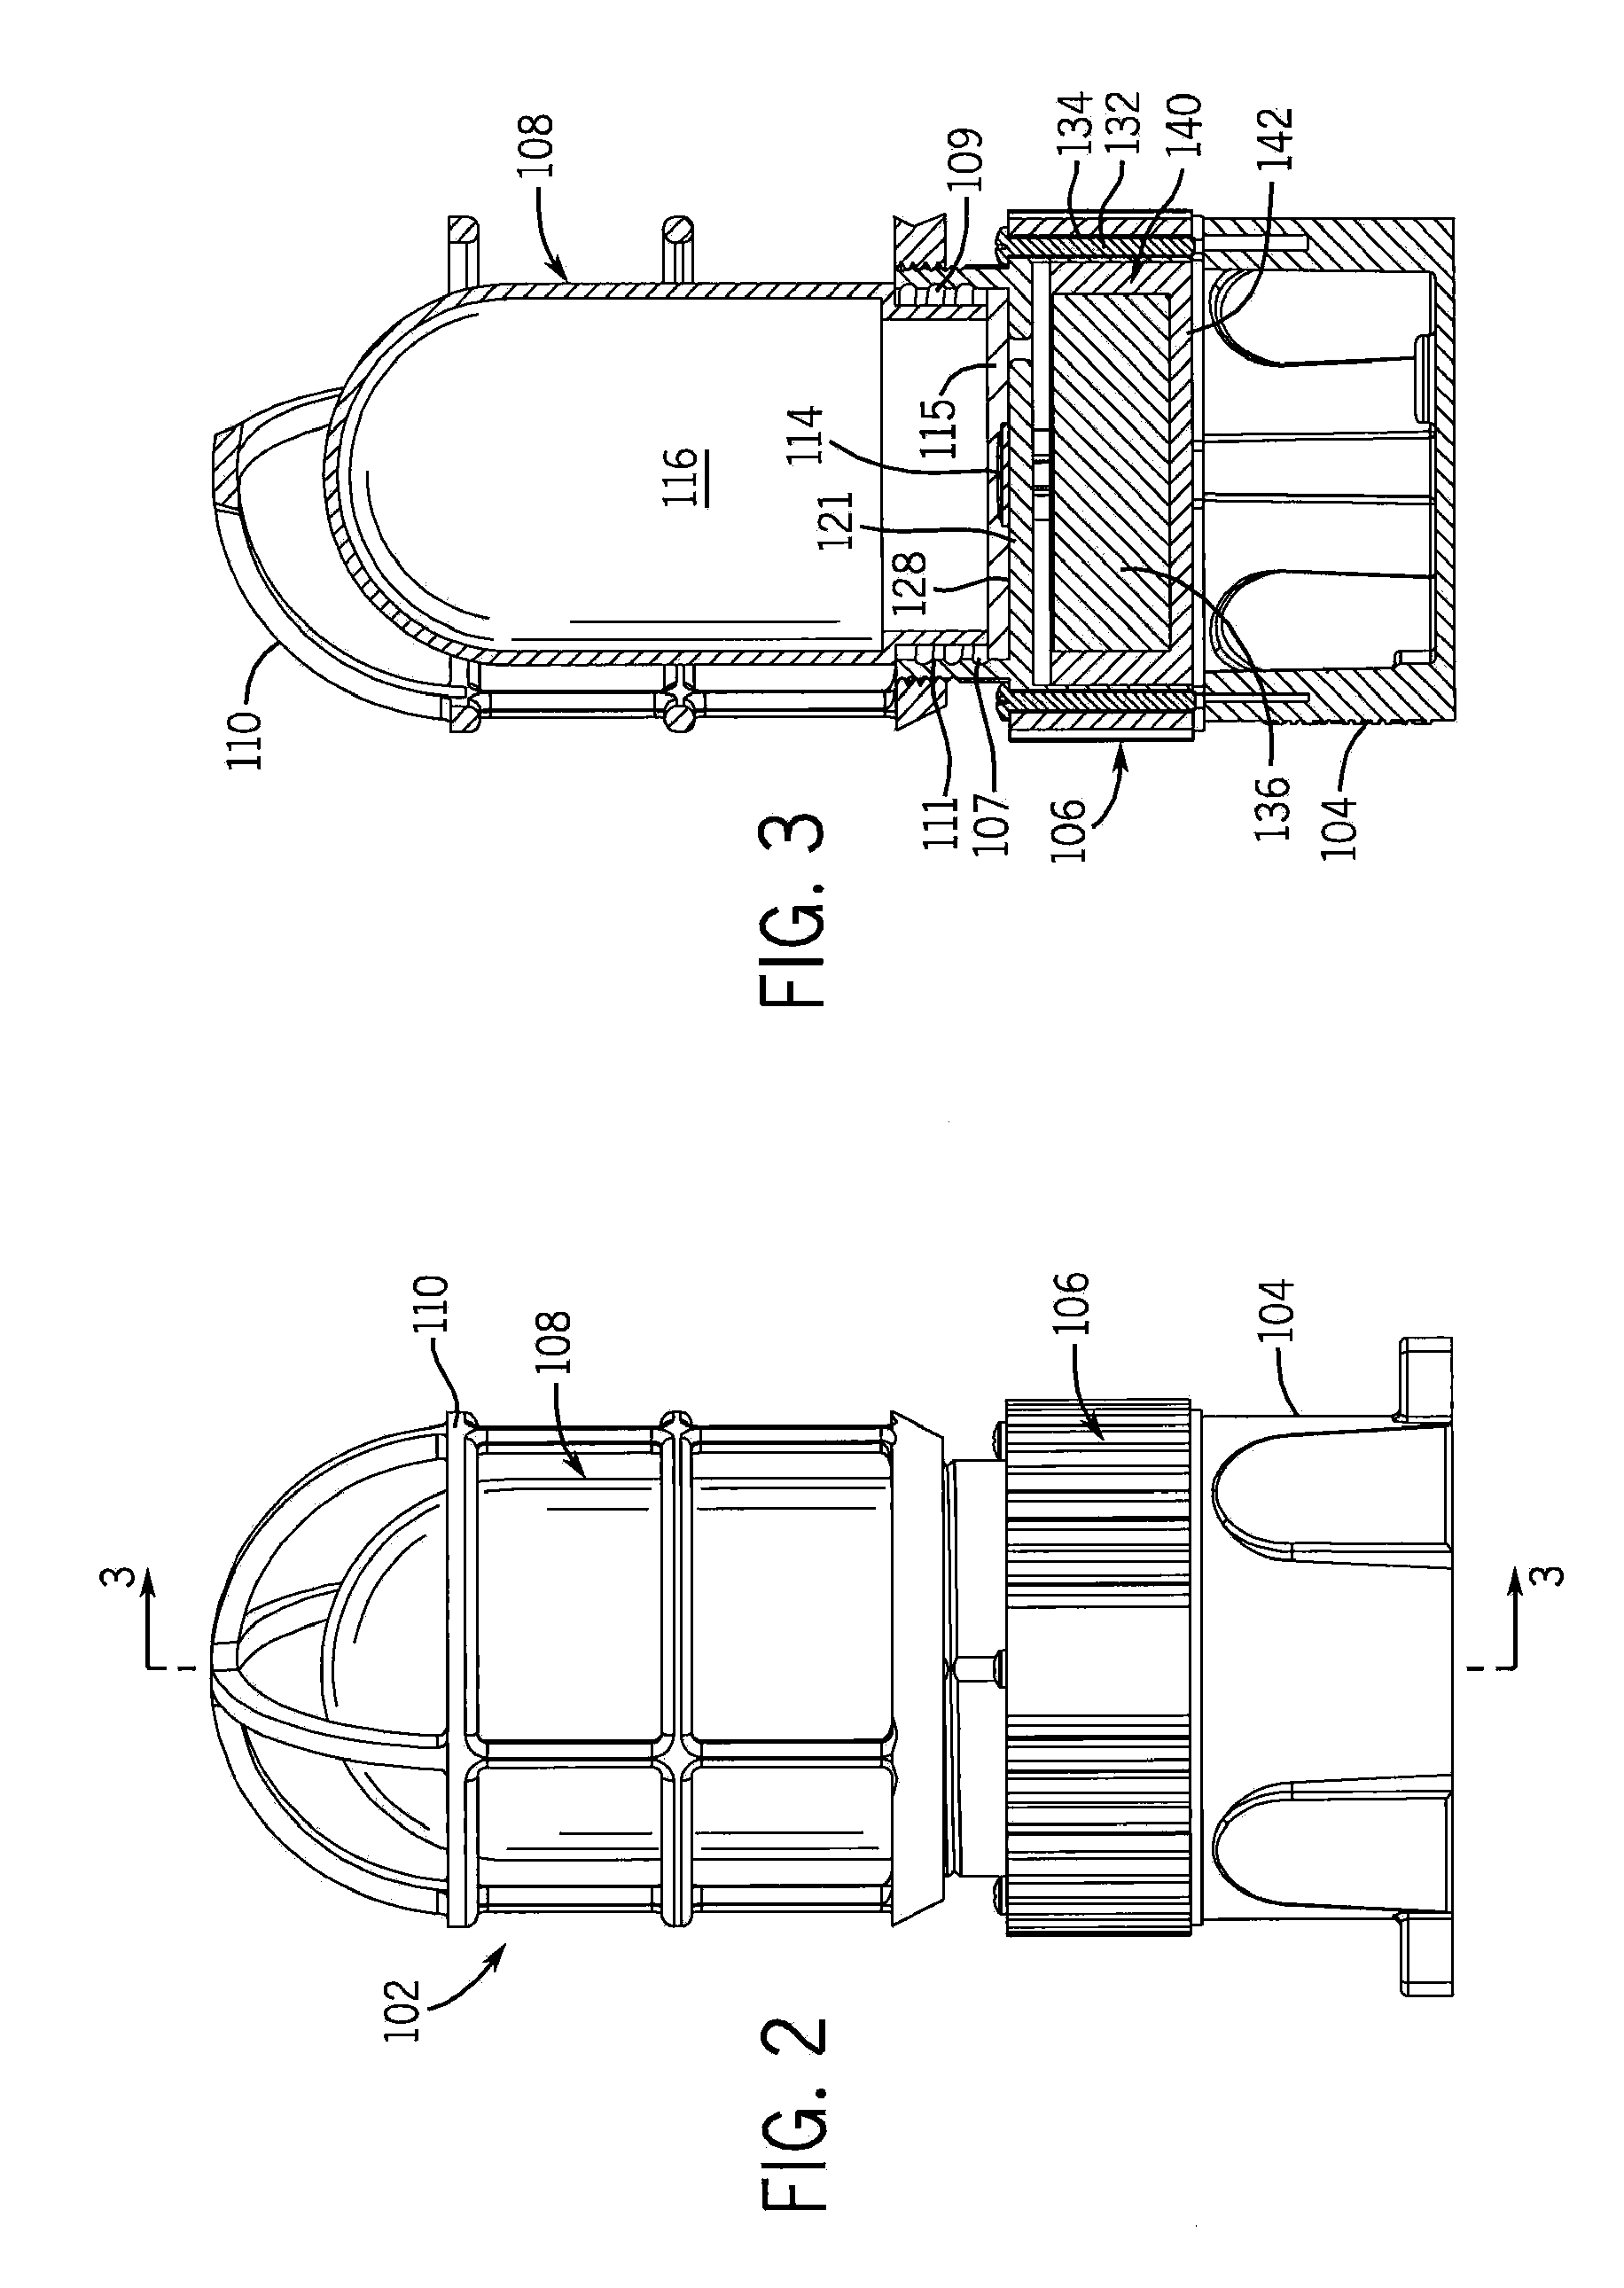 Method and apparatus for a lighting module